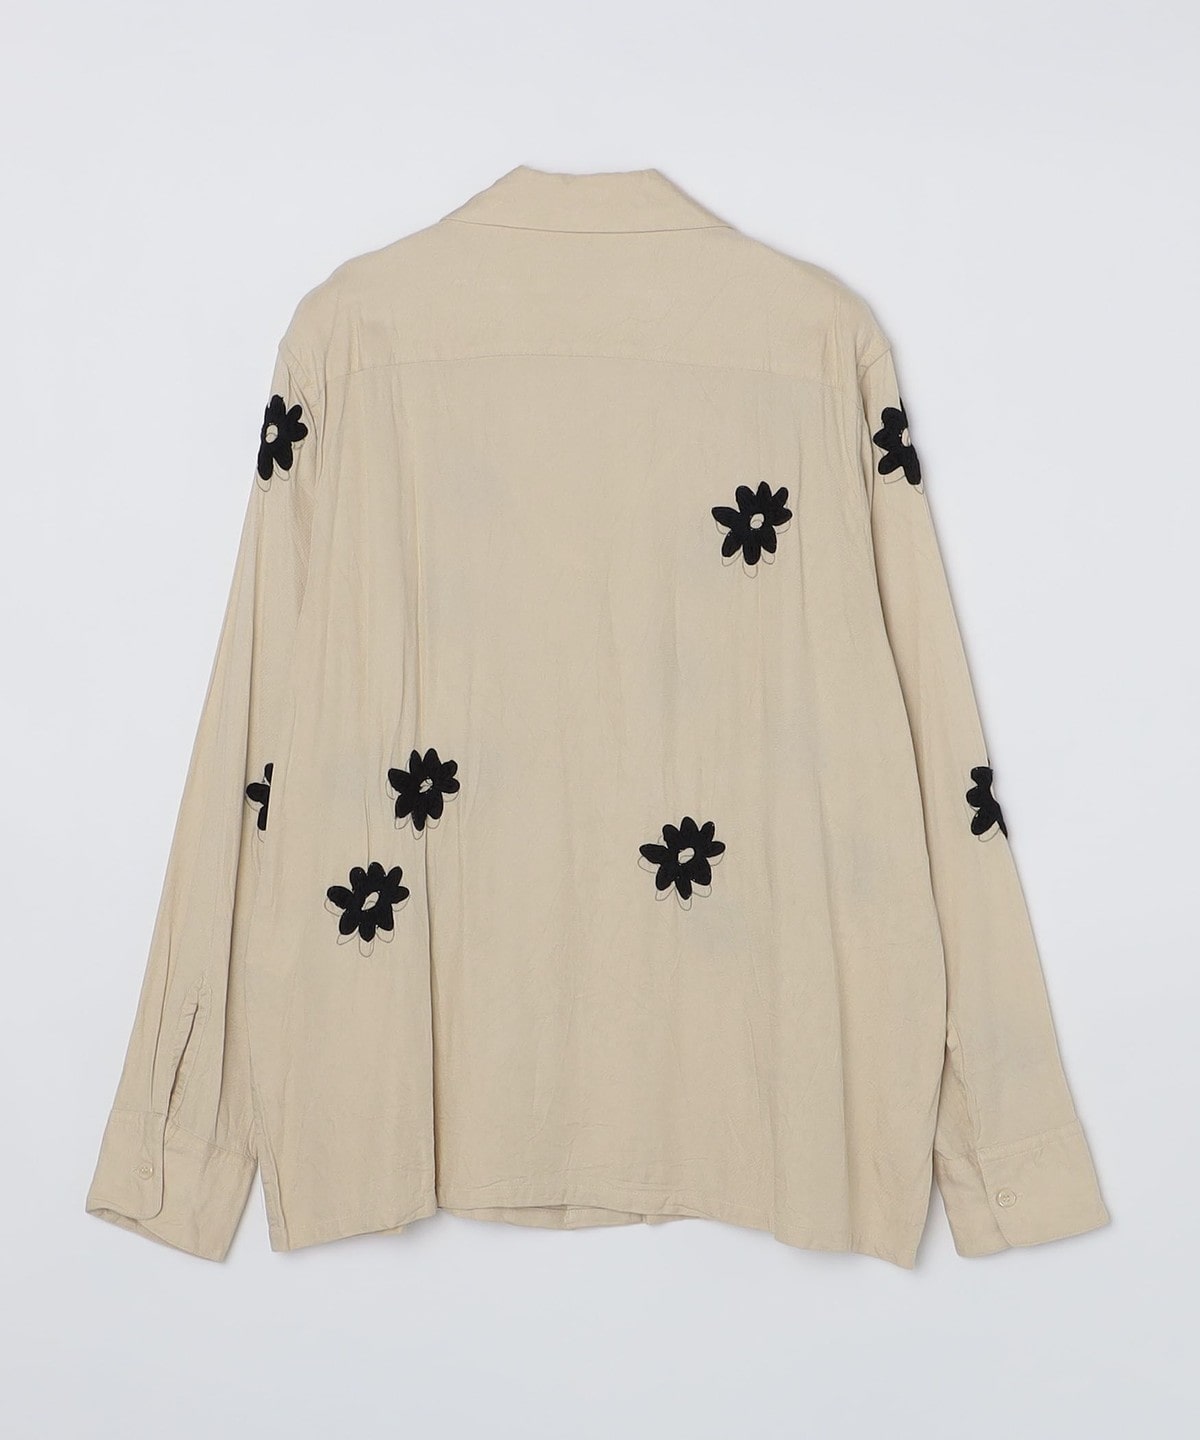 NOMA t.d.: FLORAL HAND EMBROIDERY SHIRT: シャツ/ブラウス SHIPS ...